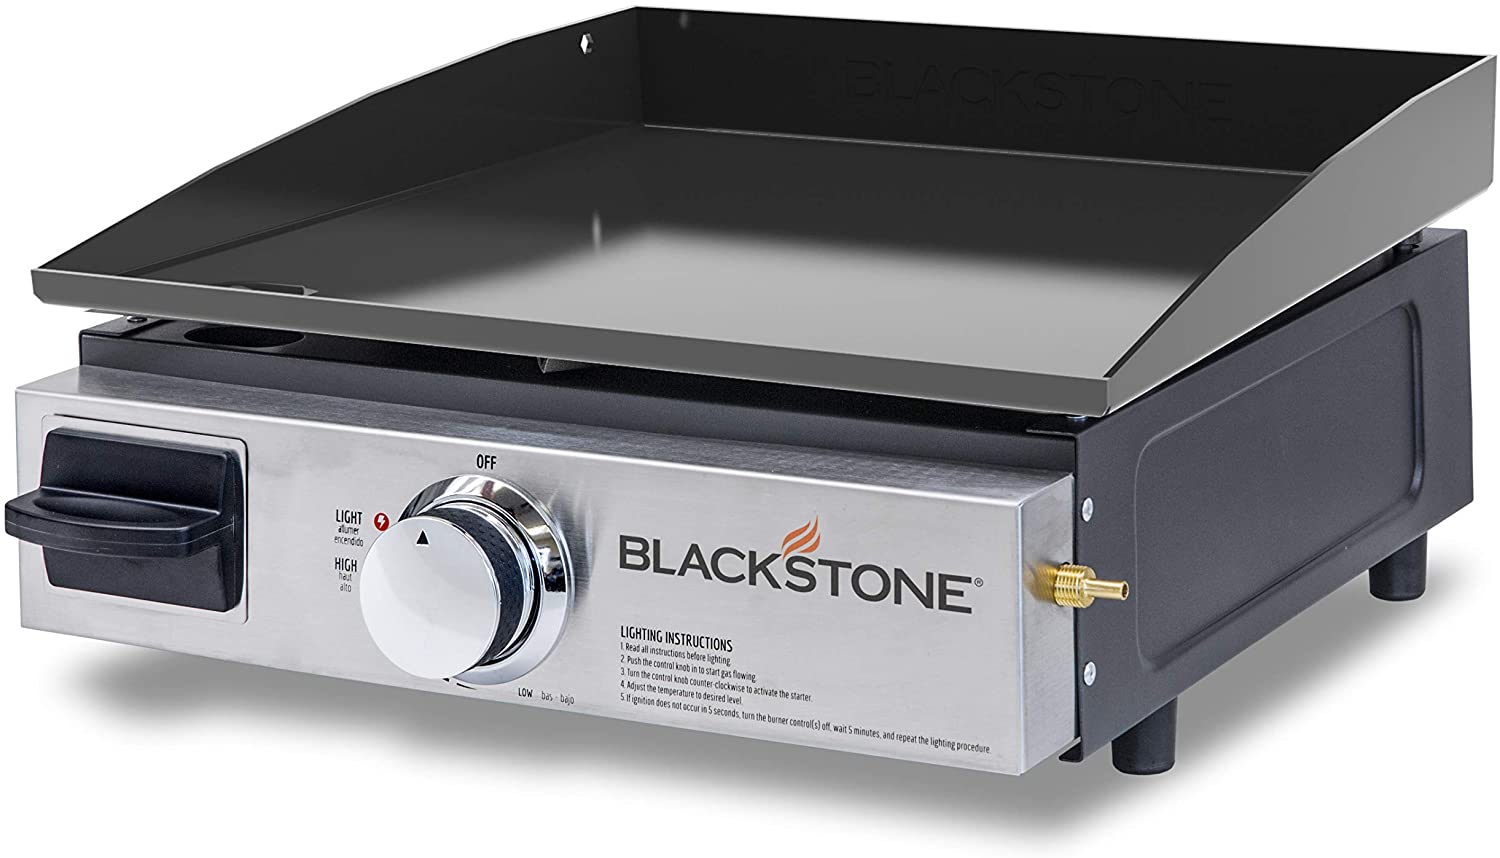 Blackstone-Table-Top-Grill-17-inch-Portable-Gas-Griddle